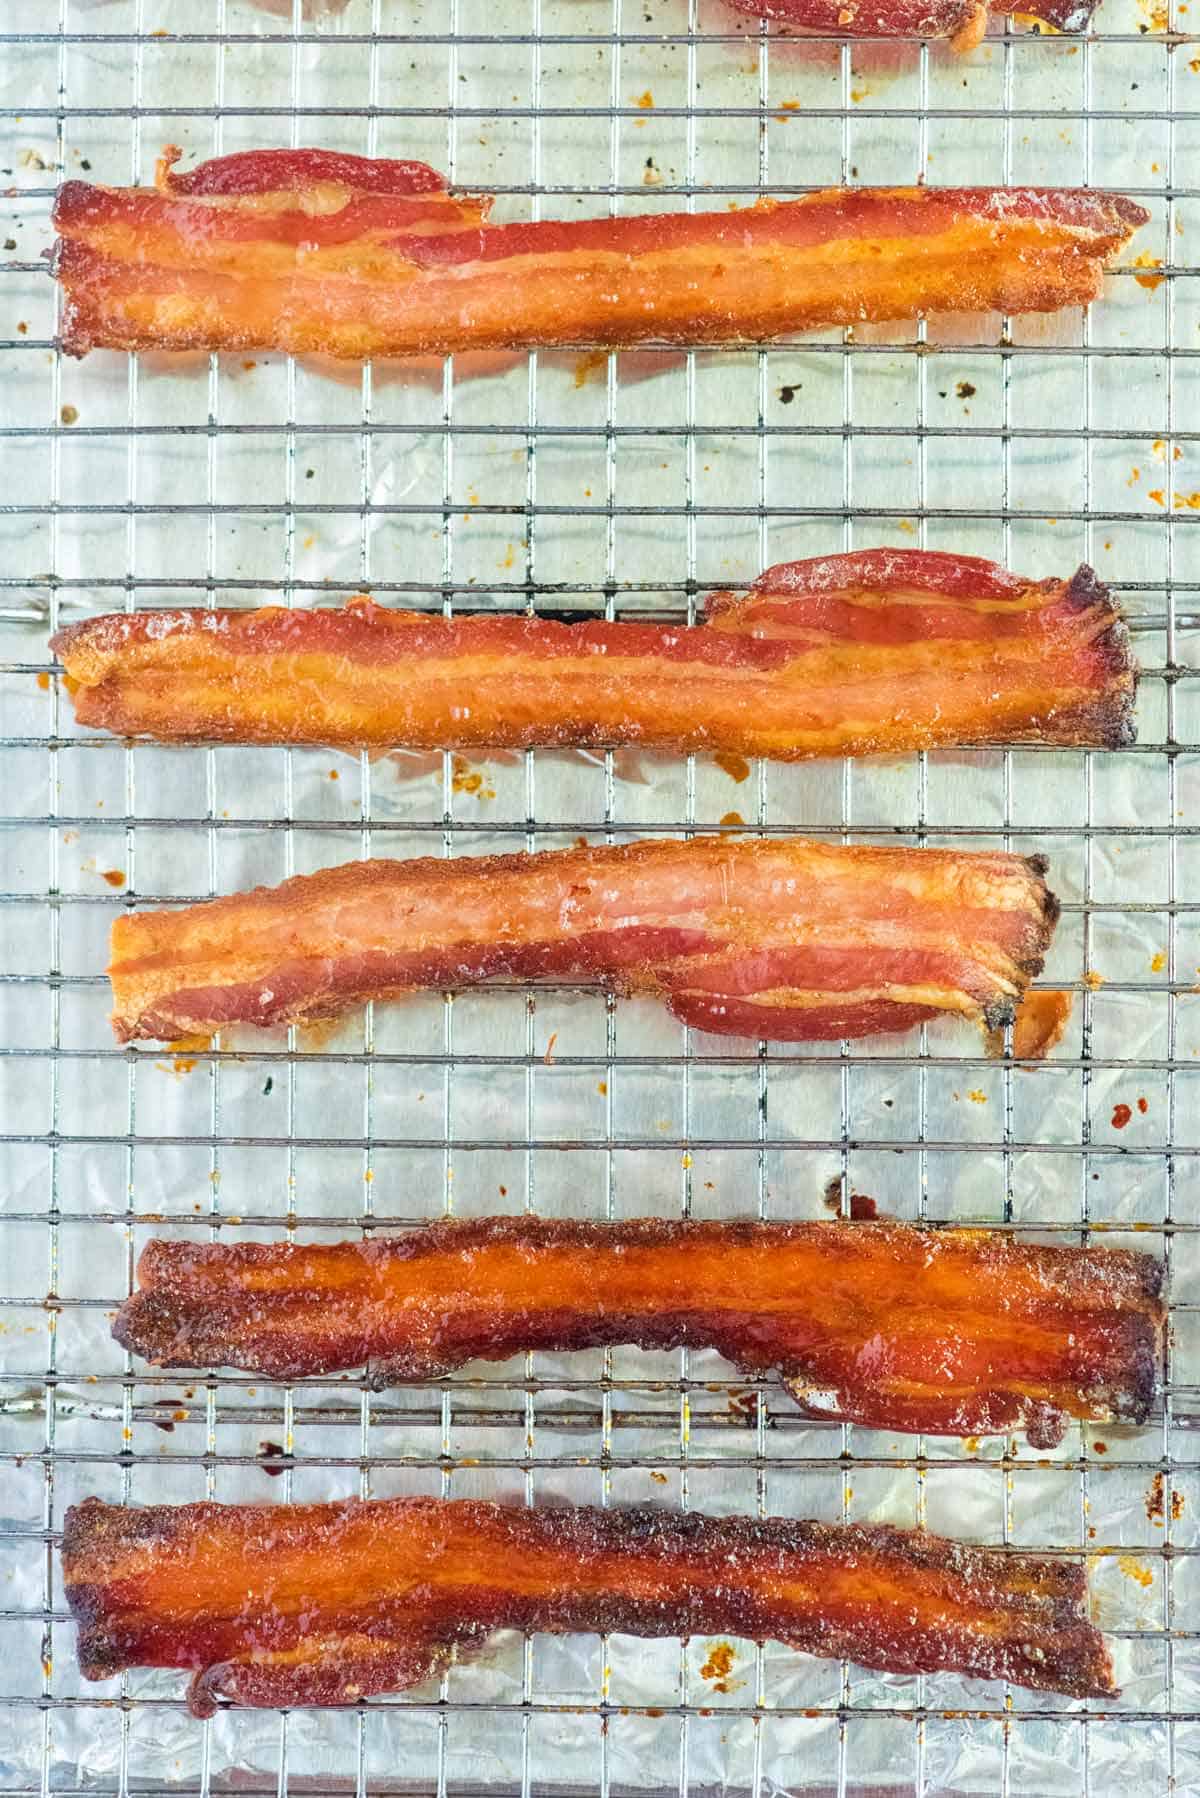 How To Bake Bacon Perfectly Every Time,Hot Tottie Recipe